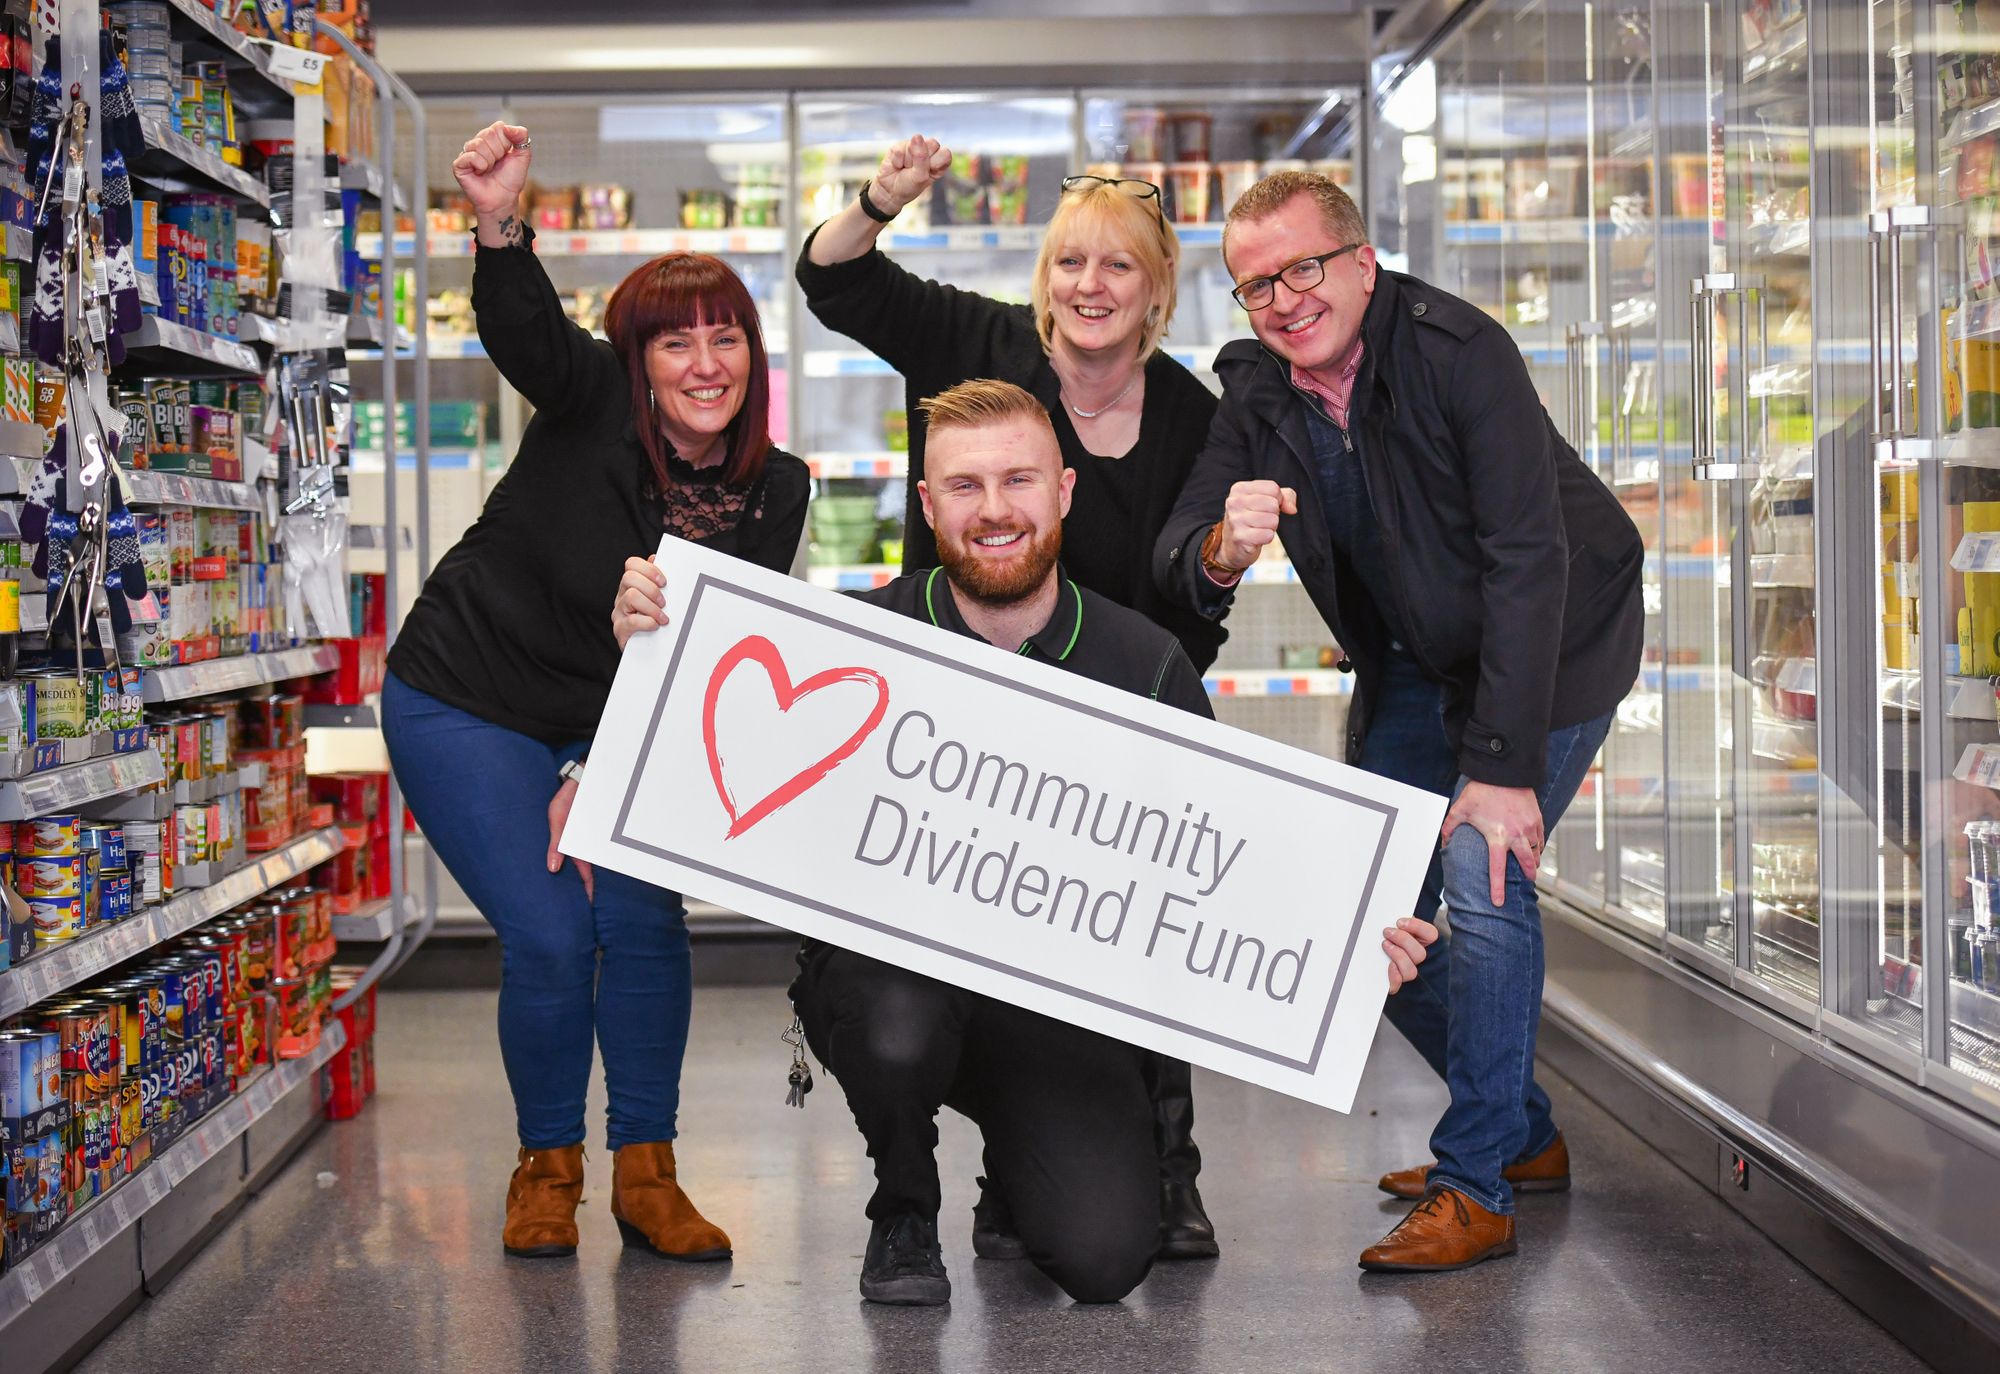 136 groups share over £170,000 in 2021 thanks to our Community Dividend Fund